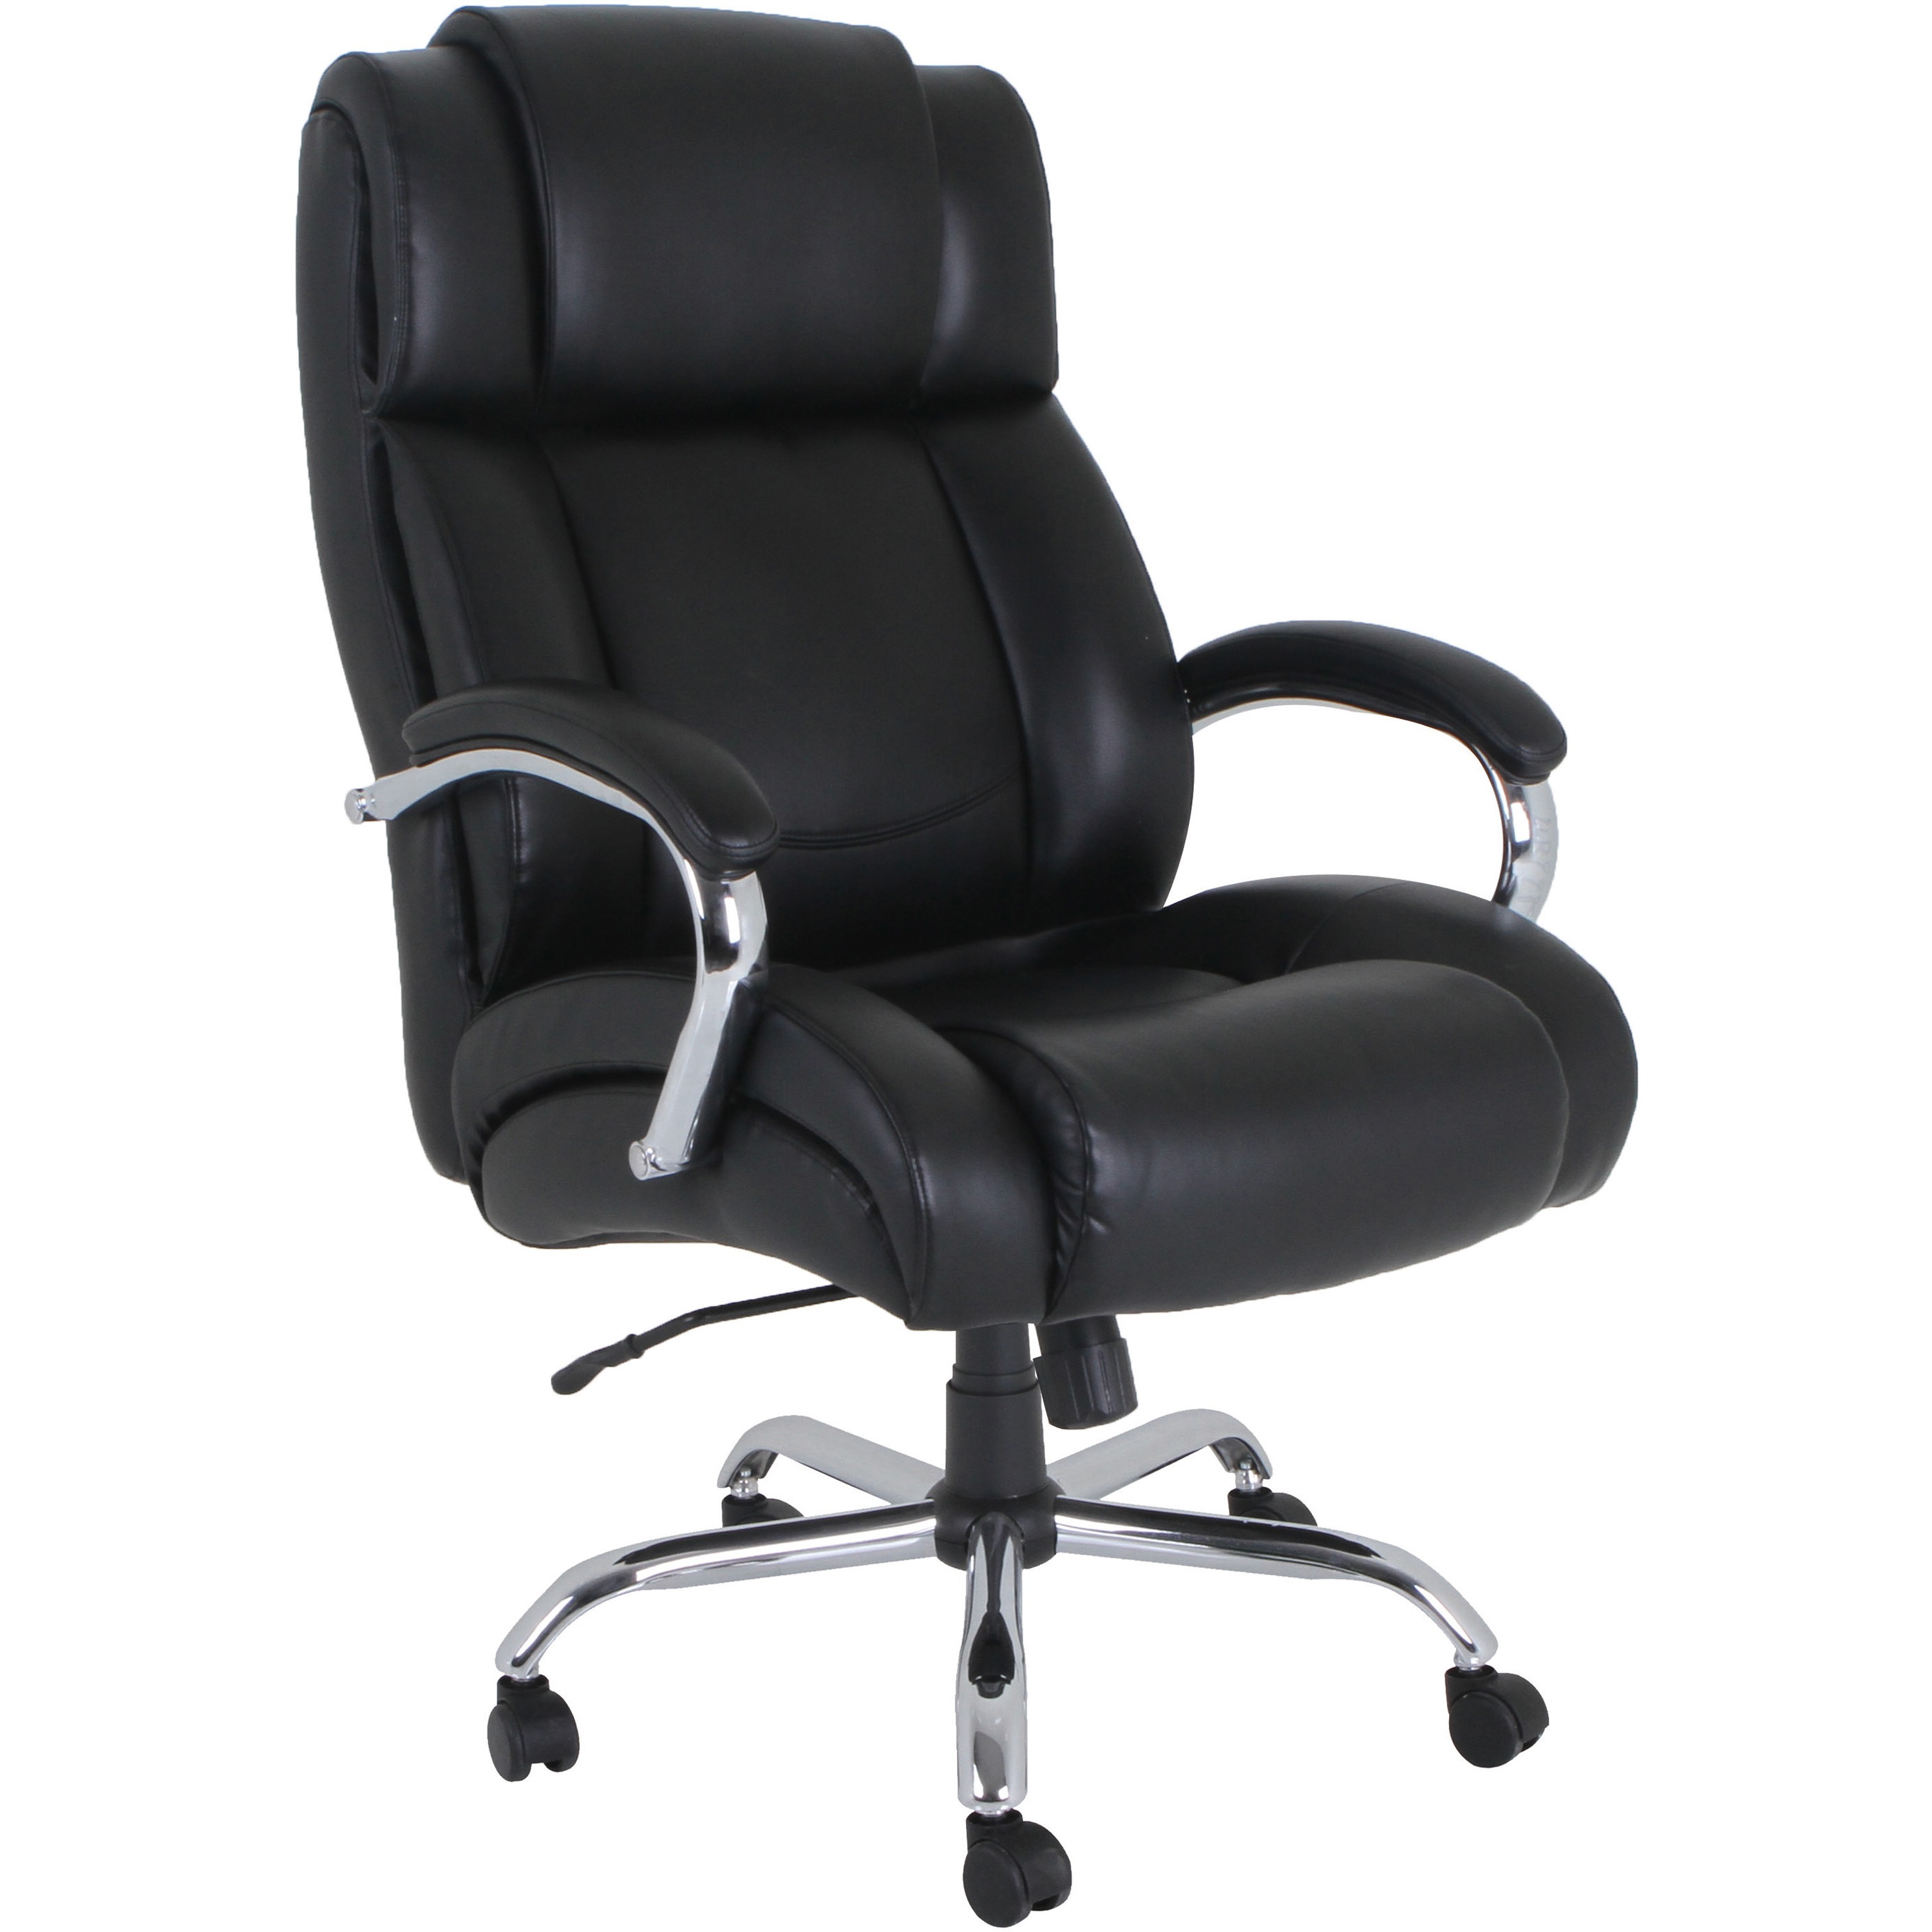 LLR 99845 | Lorell Big and Tall Leather Chair with UltraCoil Comfort